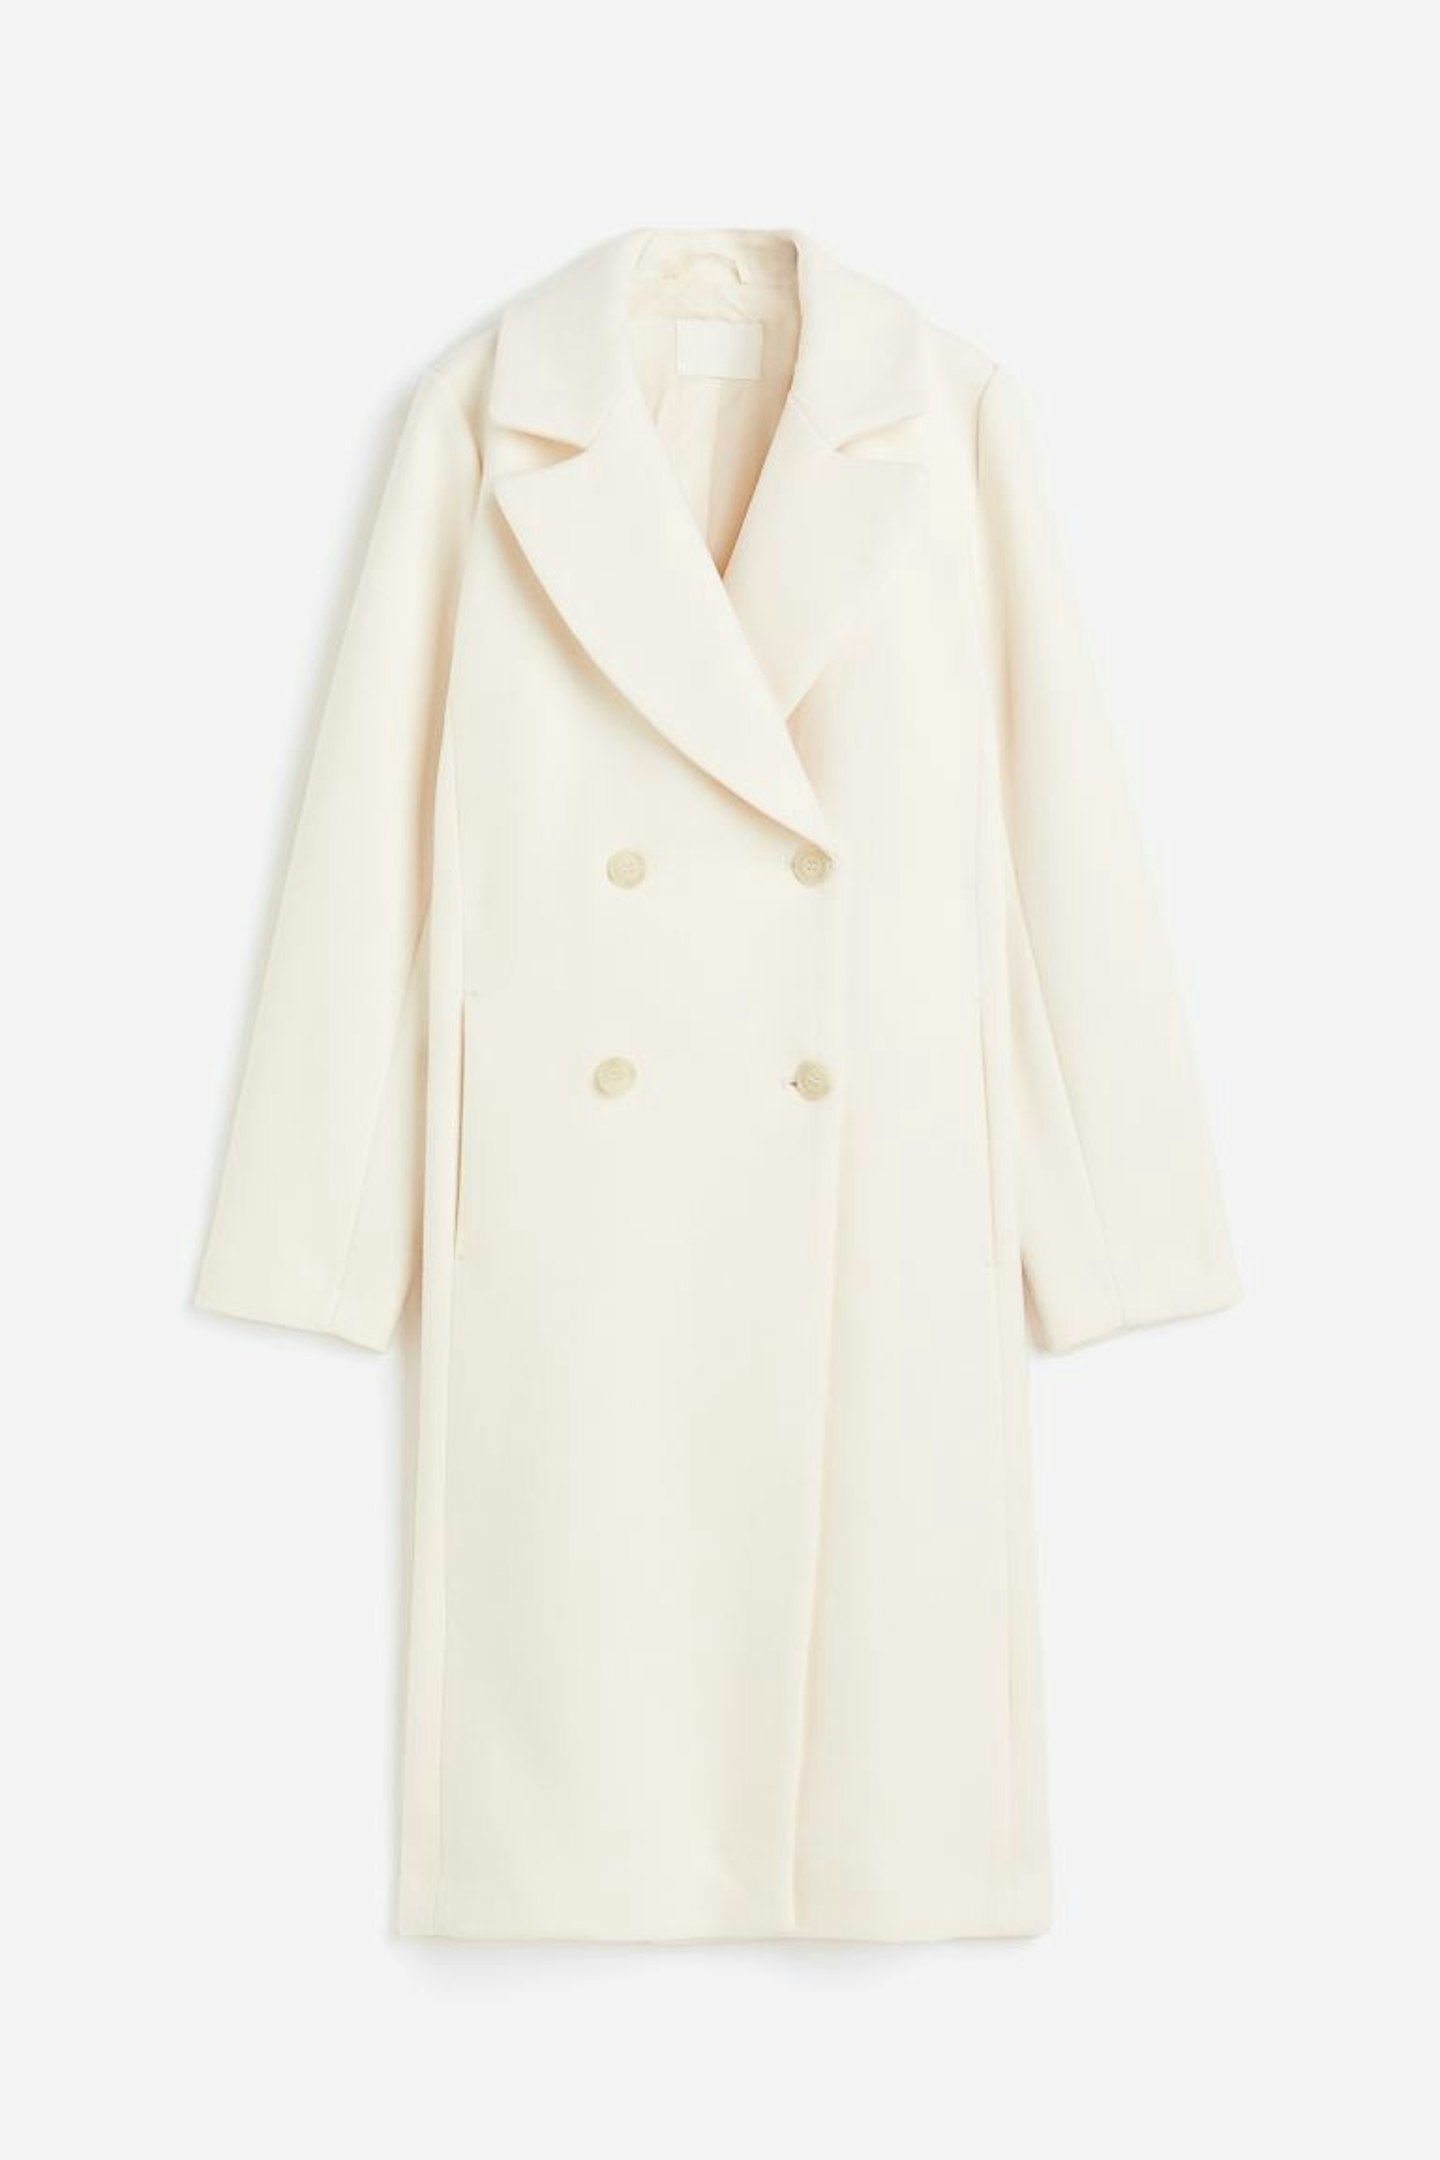 H&M, Double-Breasted Coat